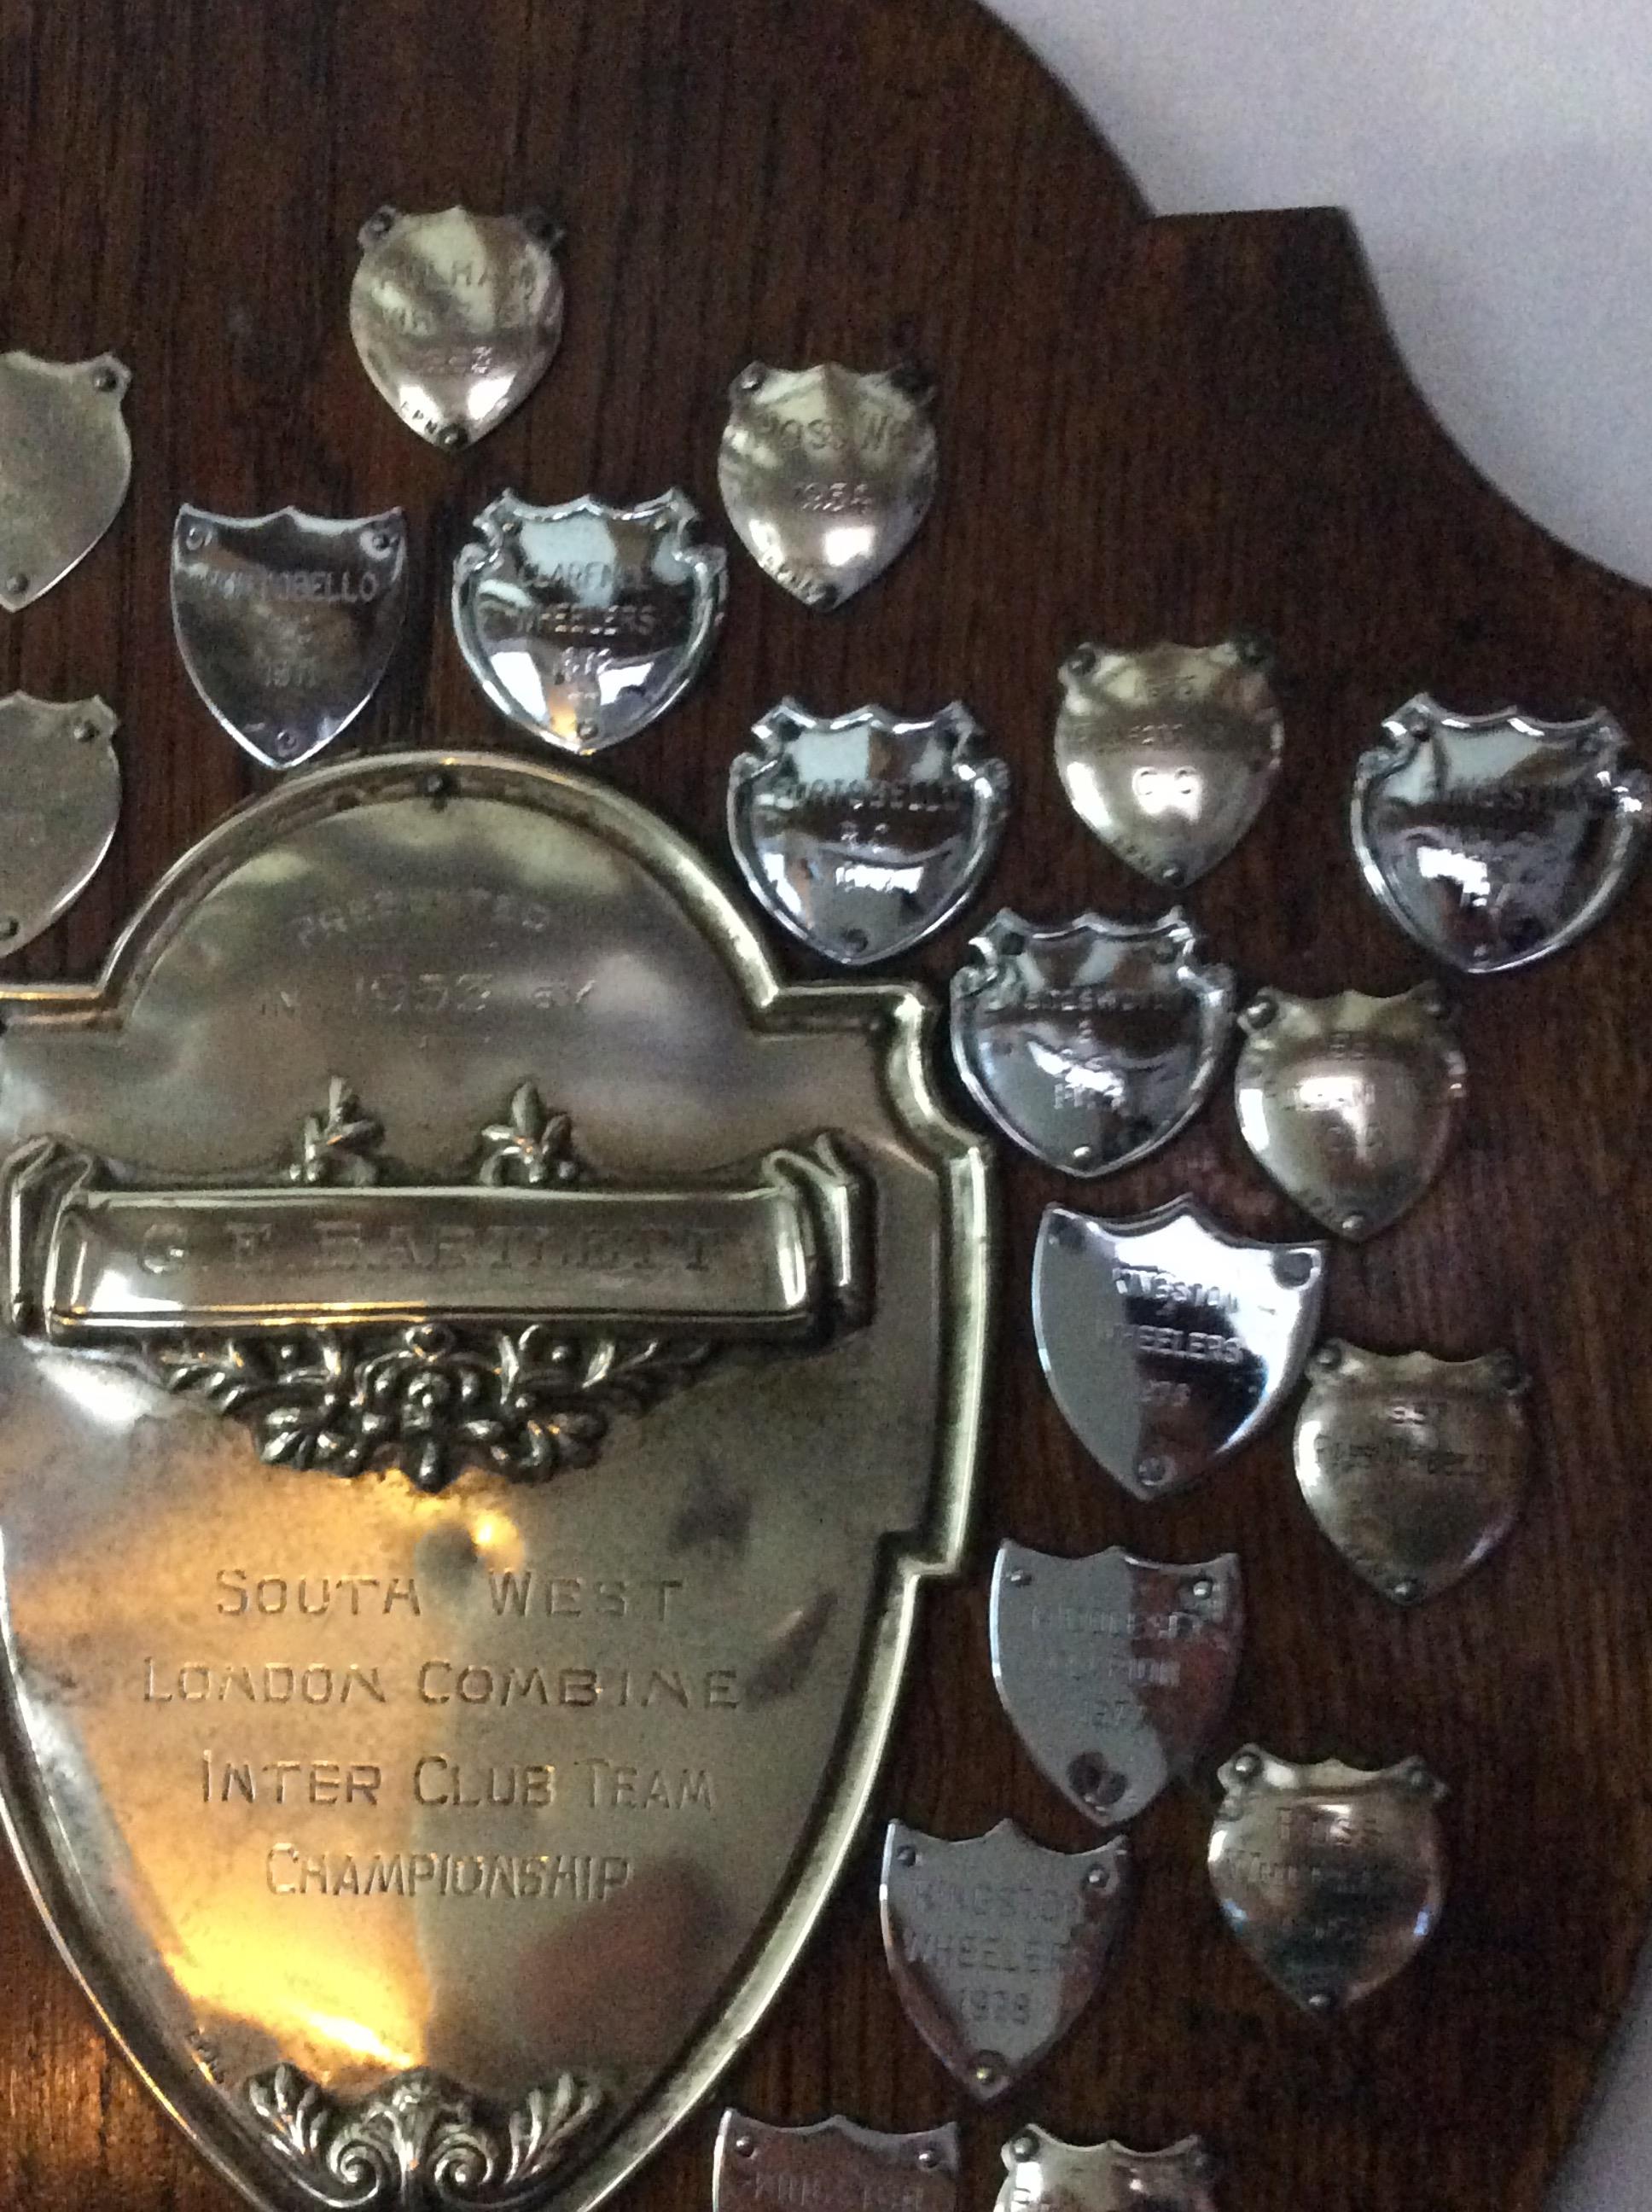 Large 1953 London Cycling Trophy Shield - Image 3 of 8